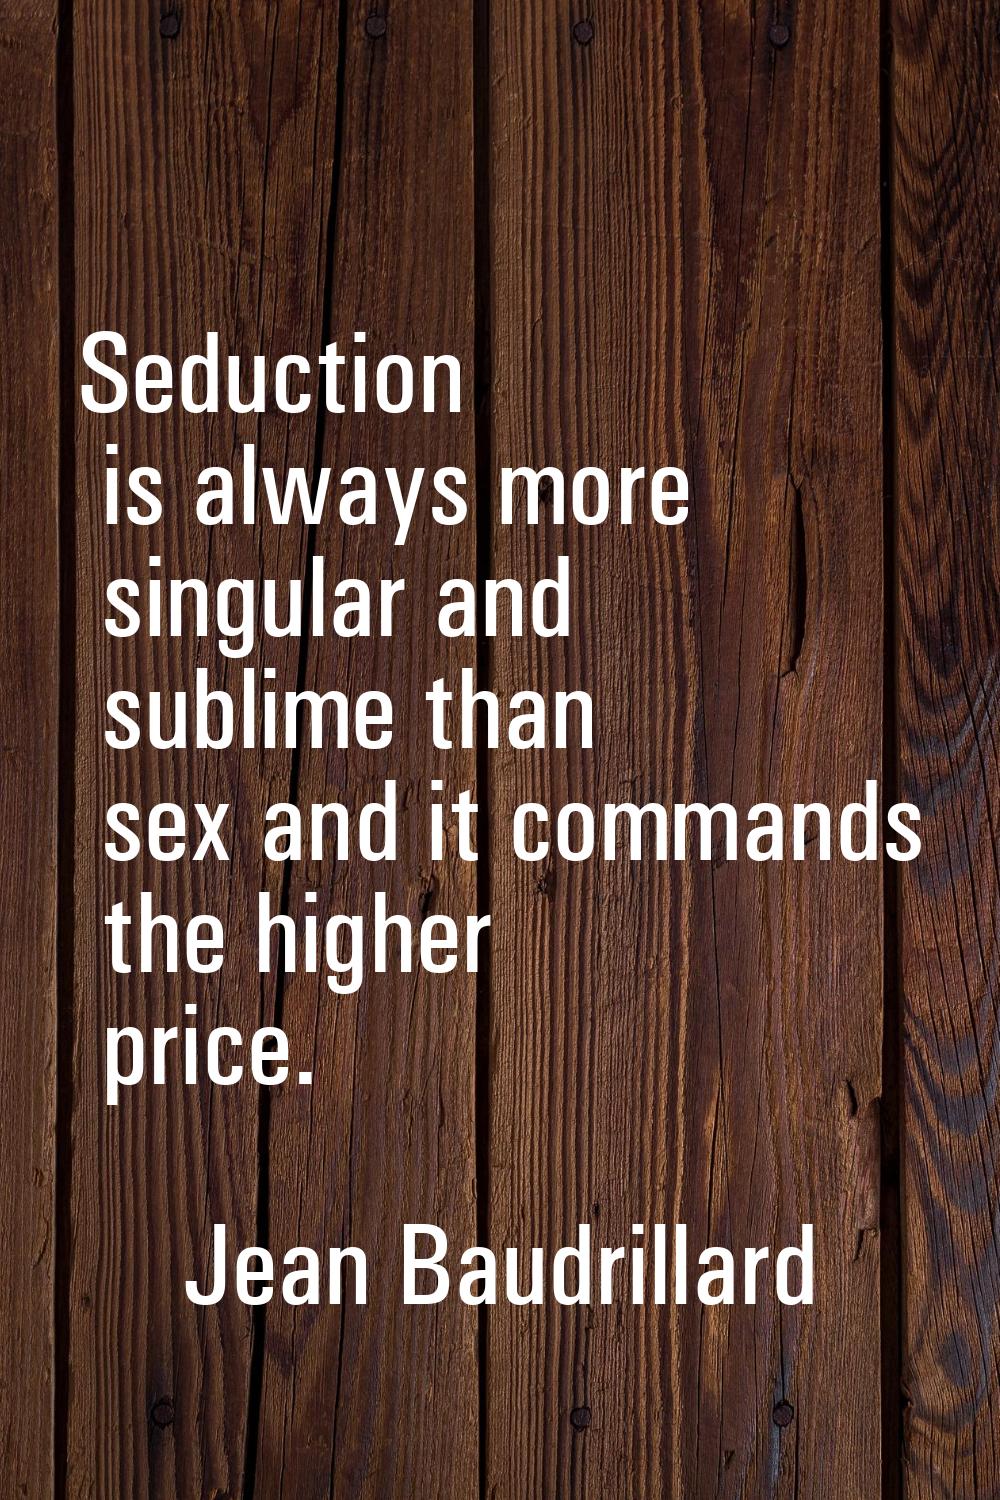 Seduction is always more singular and sublime than sex and it commands the higher price.